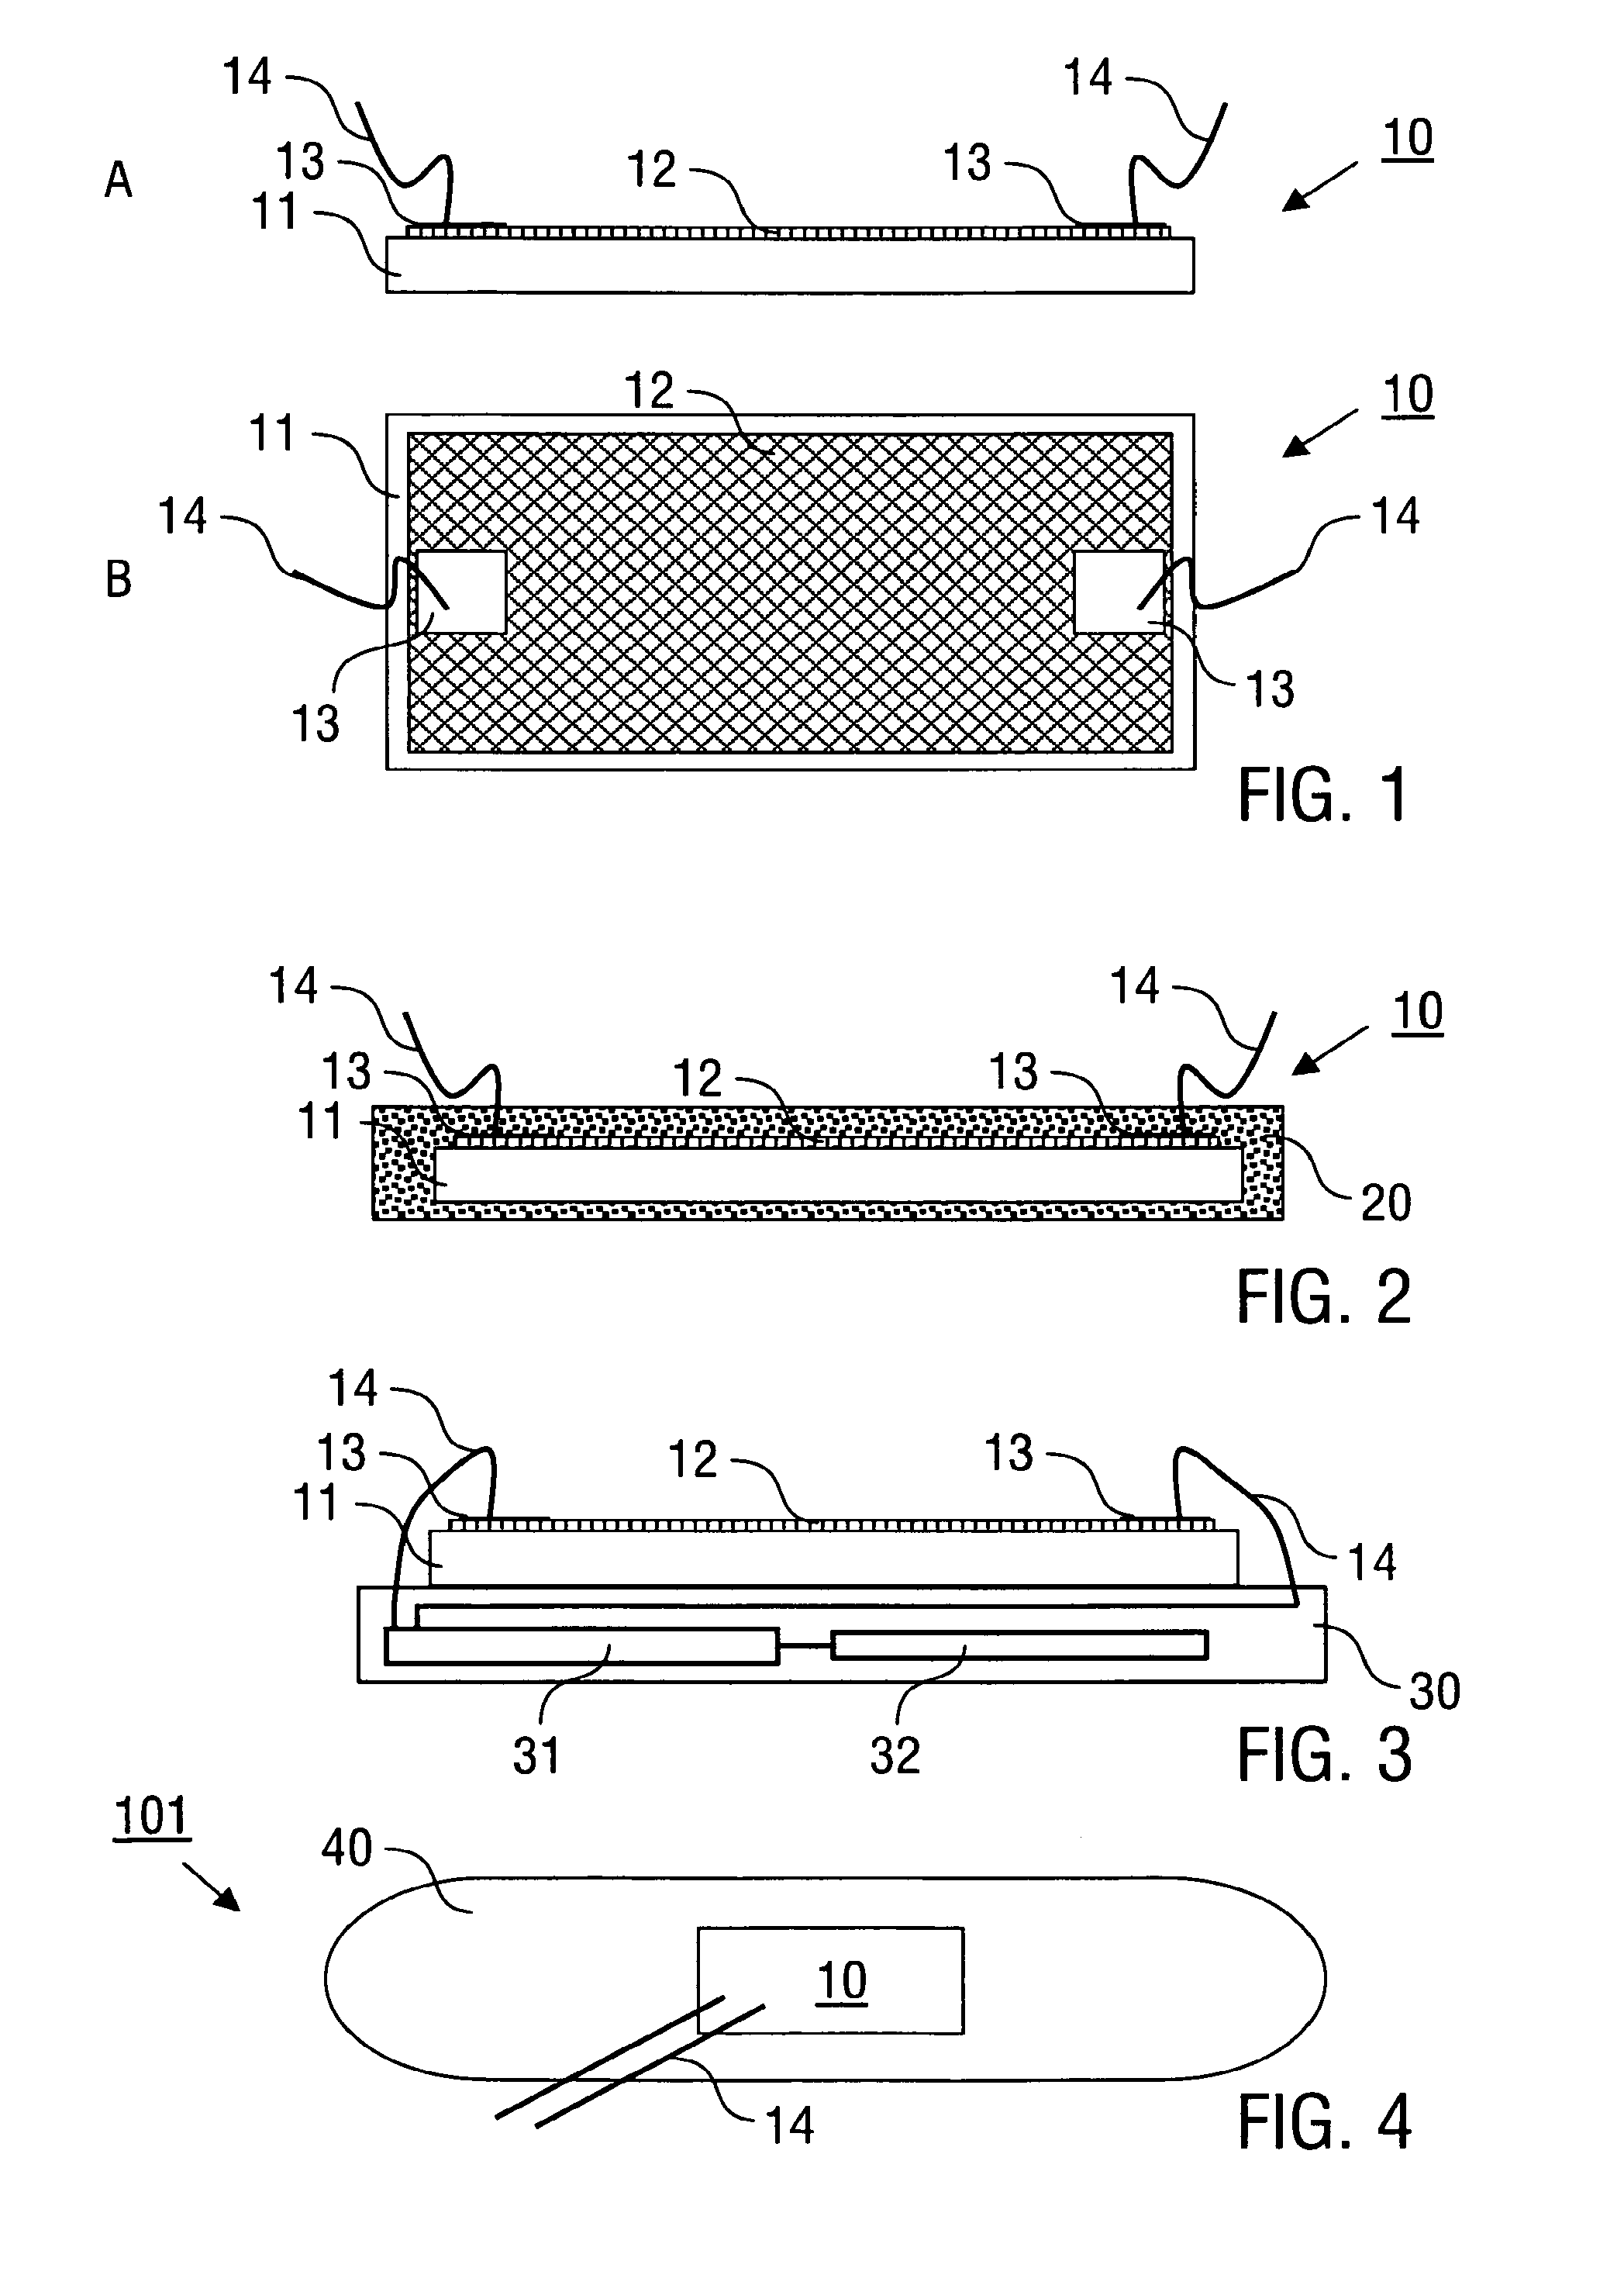 Radiation detector and measurement device for detecting X-ray radiation